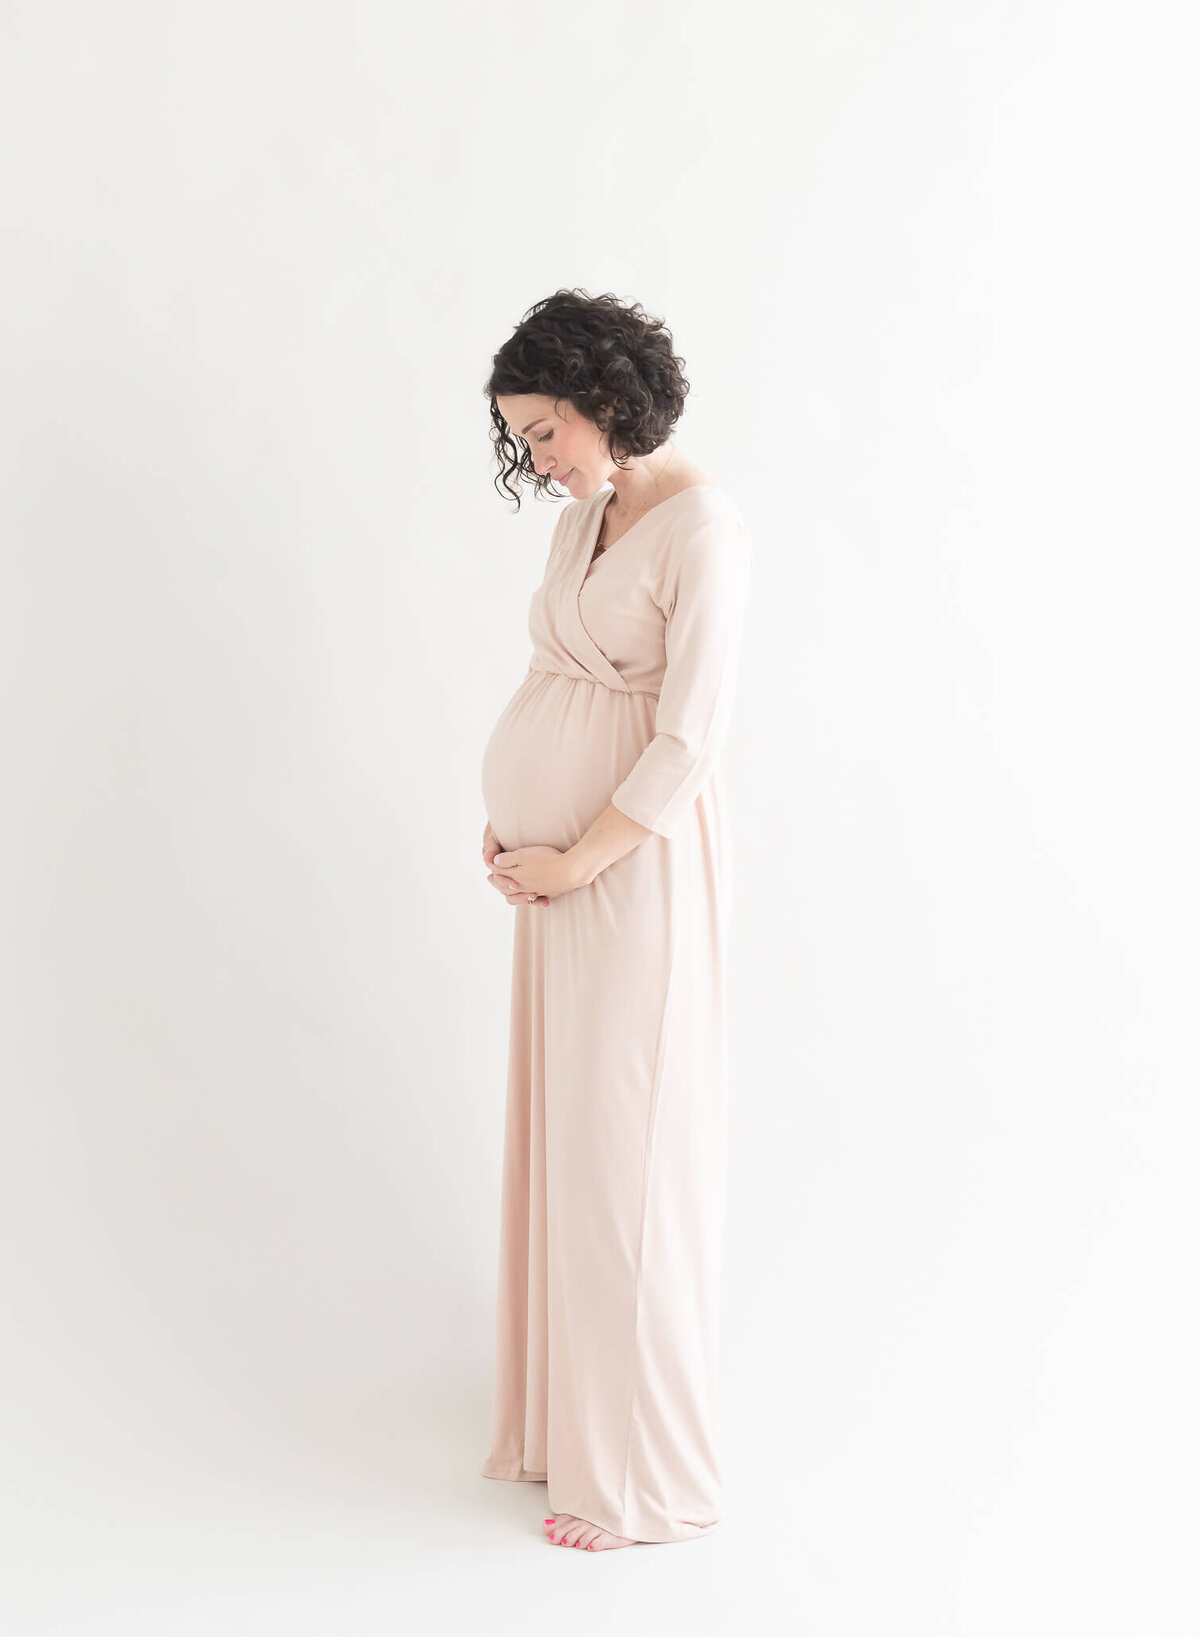 studio maternity portrait of beautiful mom in long cream dress on white background holding belly and looking down